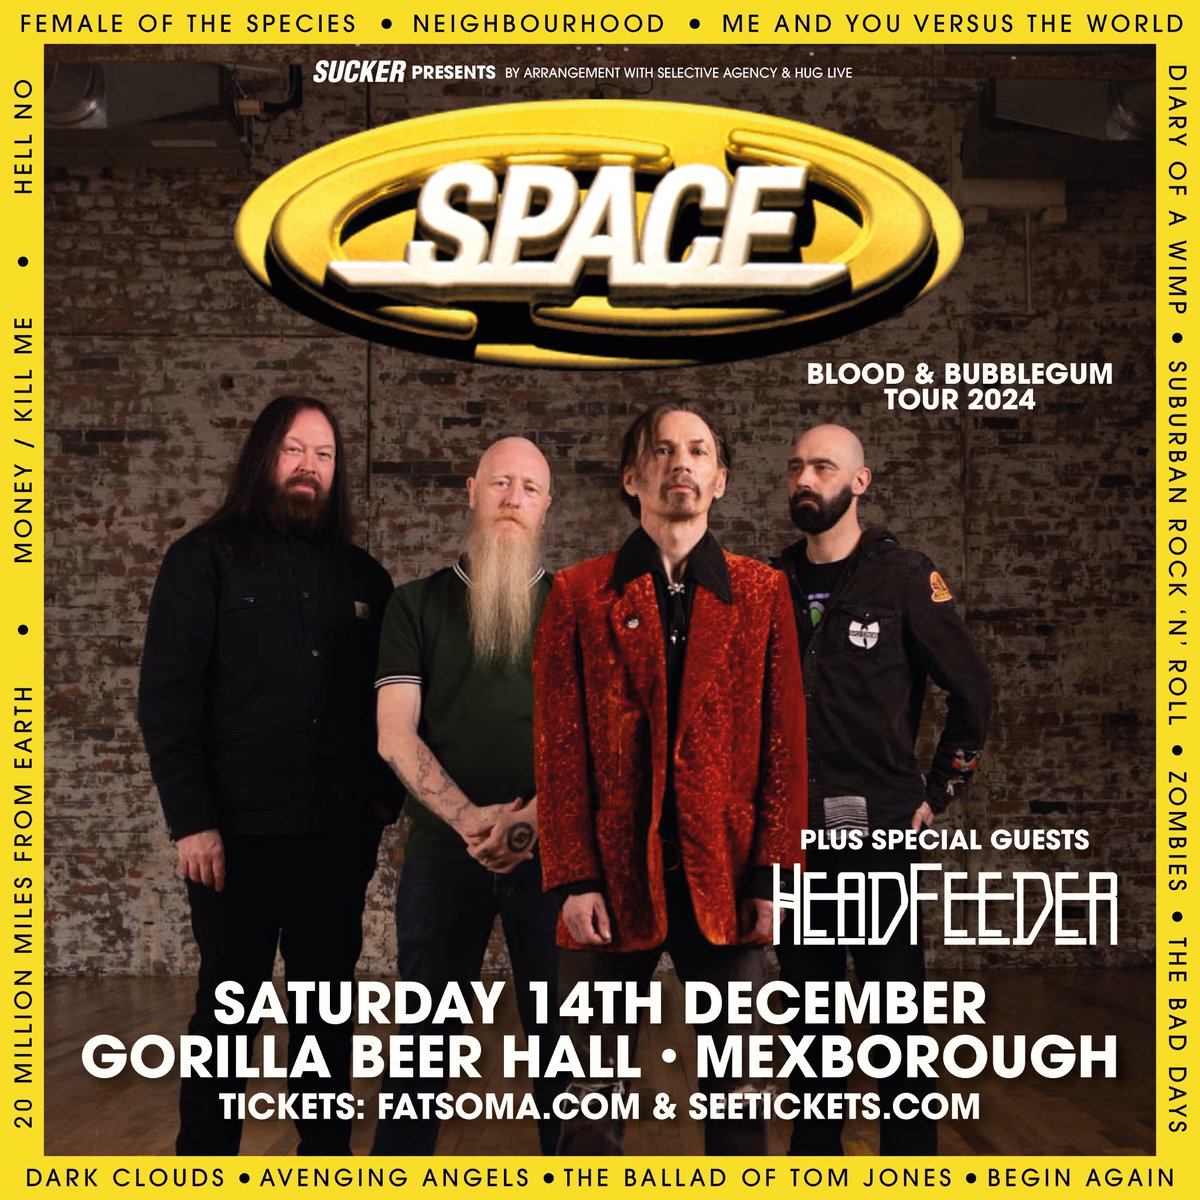 Saturday 14th December Multi platinum selling @spacebanduk join us in Mexborough as part of their 'Blood & Bubblegum tour along with support from @headfeederband Tickets available THIS WEDNESDAY 17th April at 10am HERE: fatsoma.com/e/pvj4s4fp/spa… Thanks to @suckerpresents